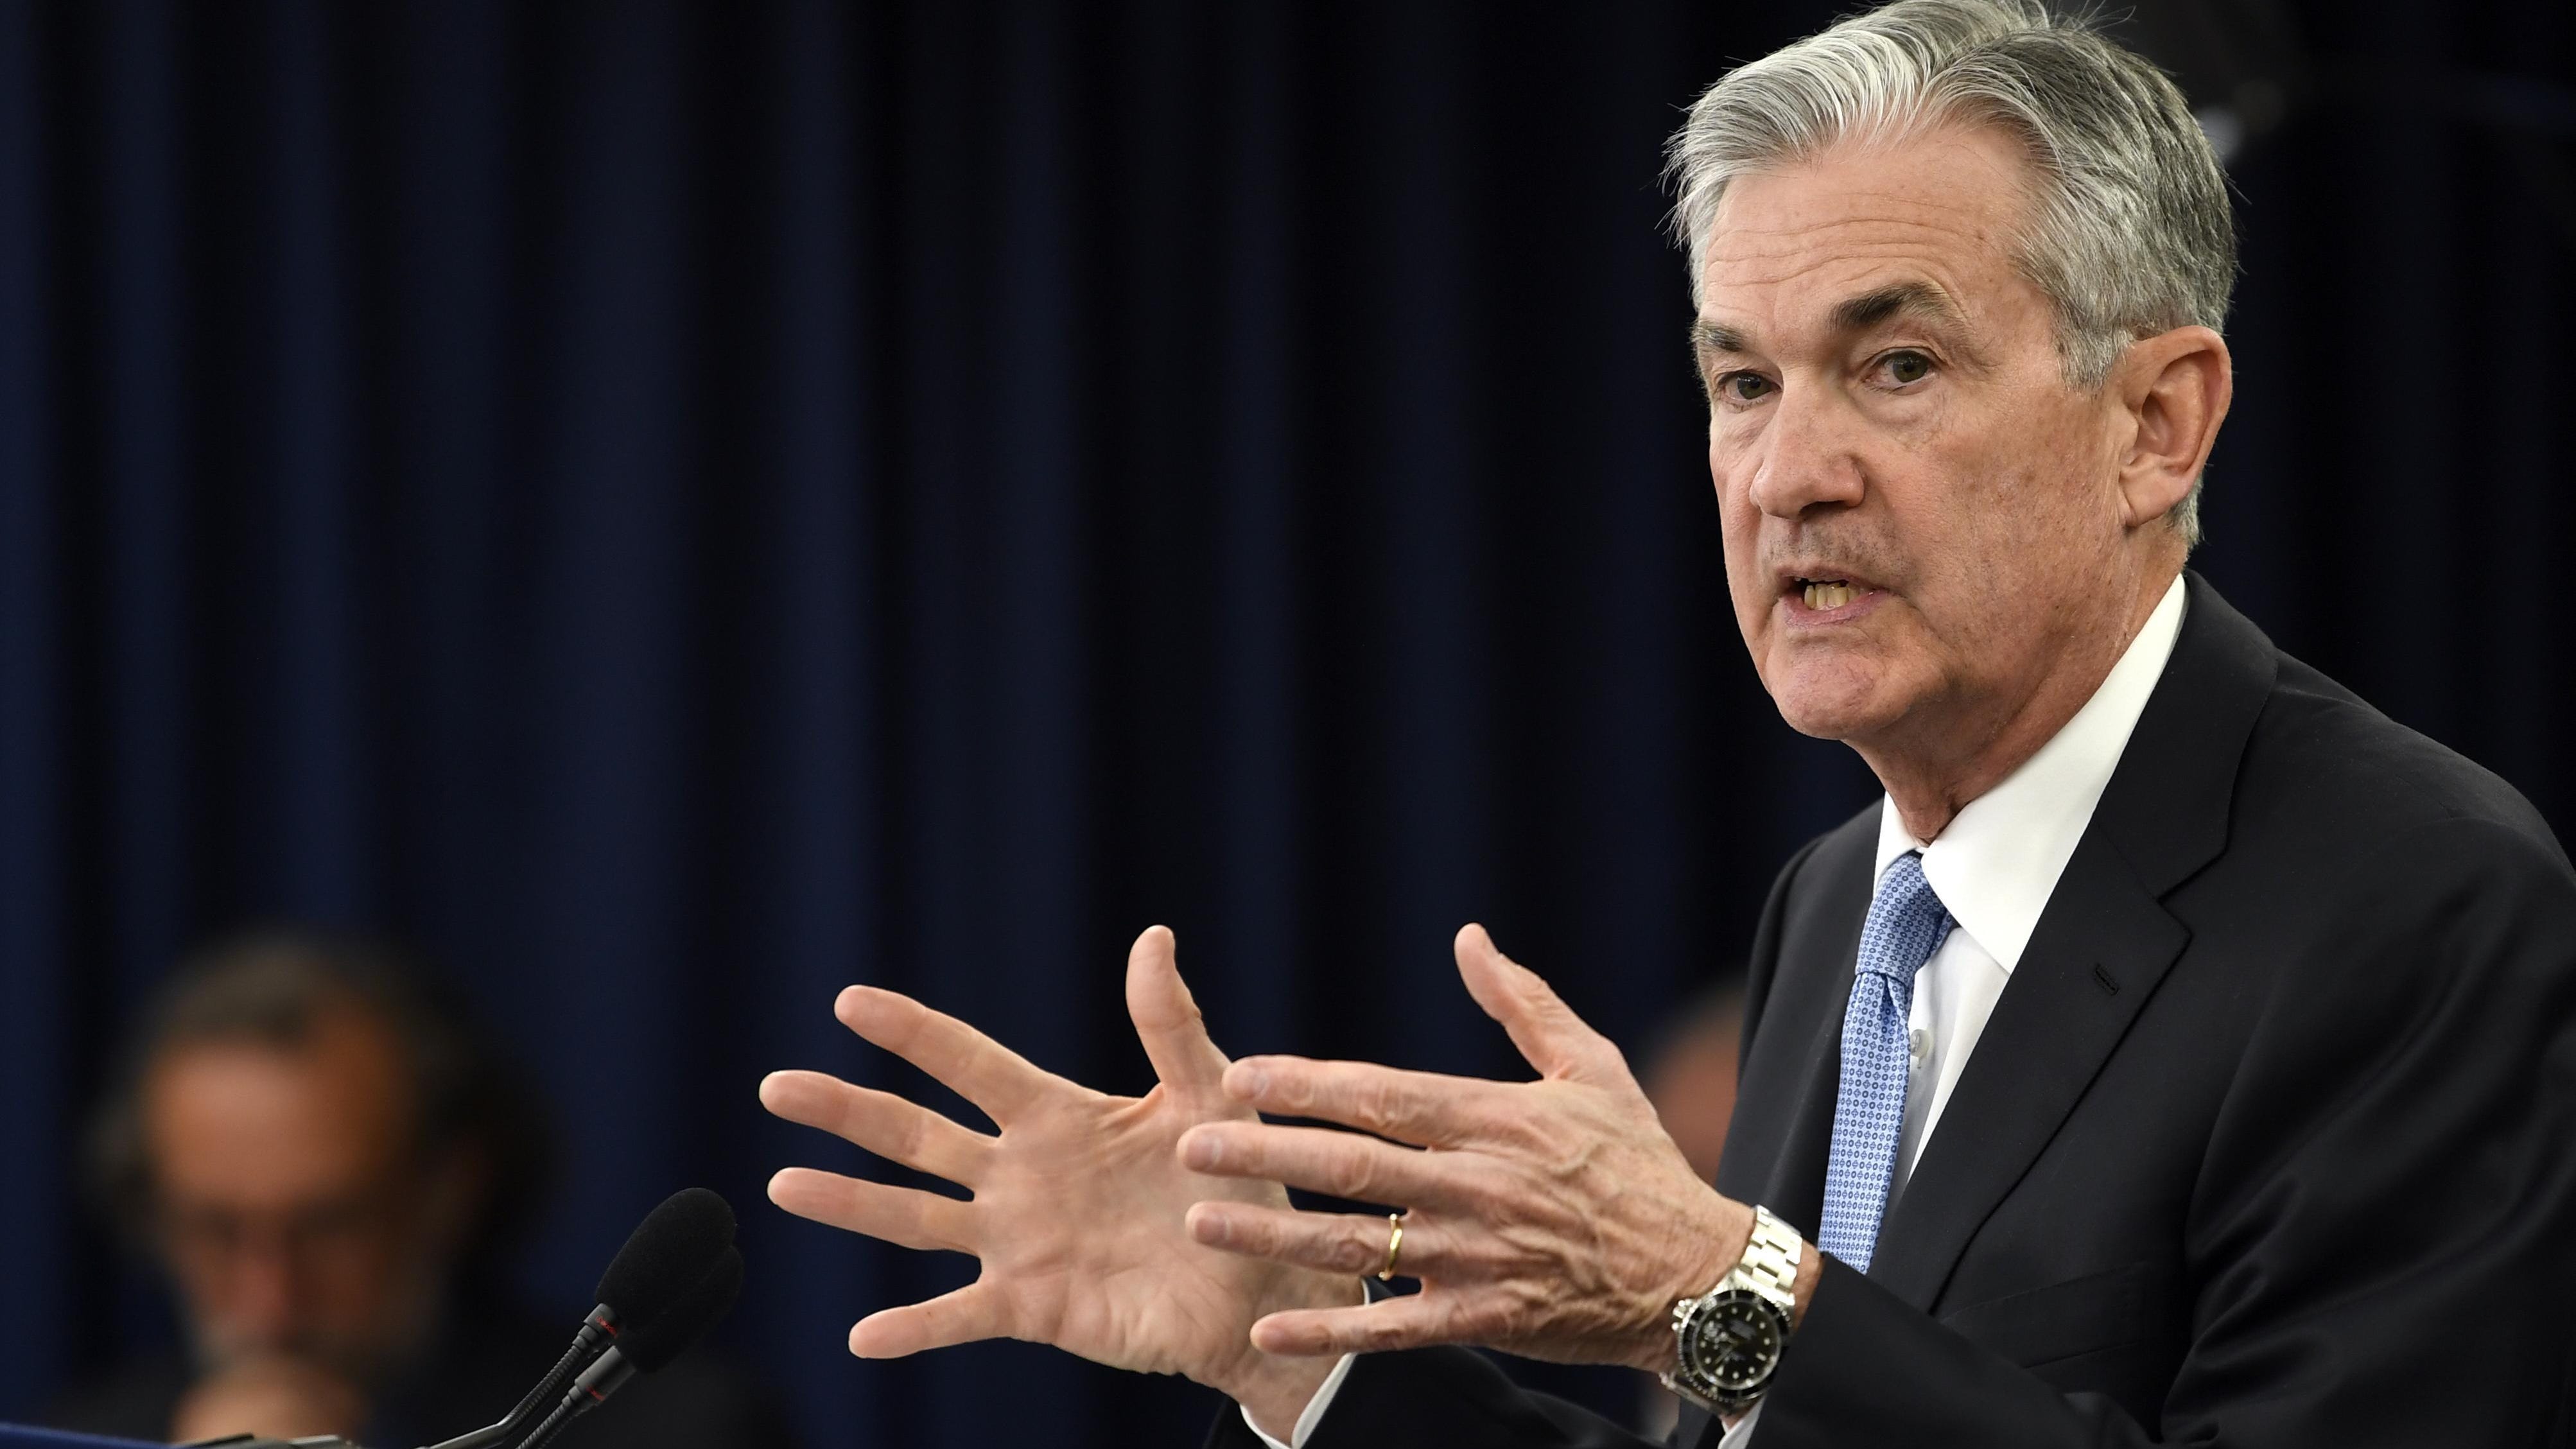 In this March 20, 2019, file photo Federal Reserve Chair Jerome Powell speaks during a news conference in Washington. The Federal Reserve is putting forward two proposals to modify regulations put in place after the 2008 financial crisis that the banking industry complained were too restrictive.